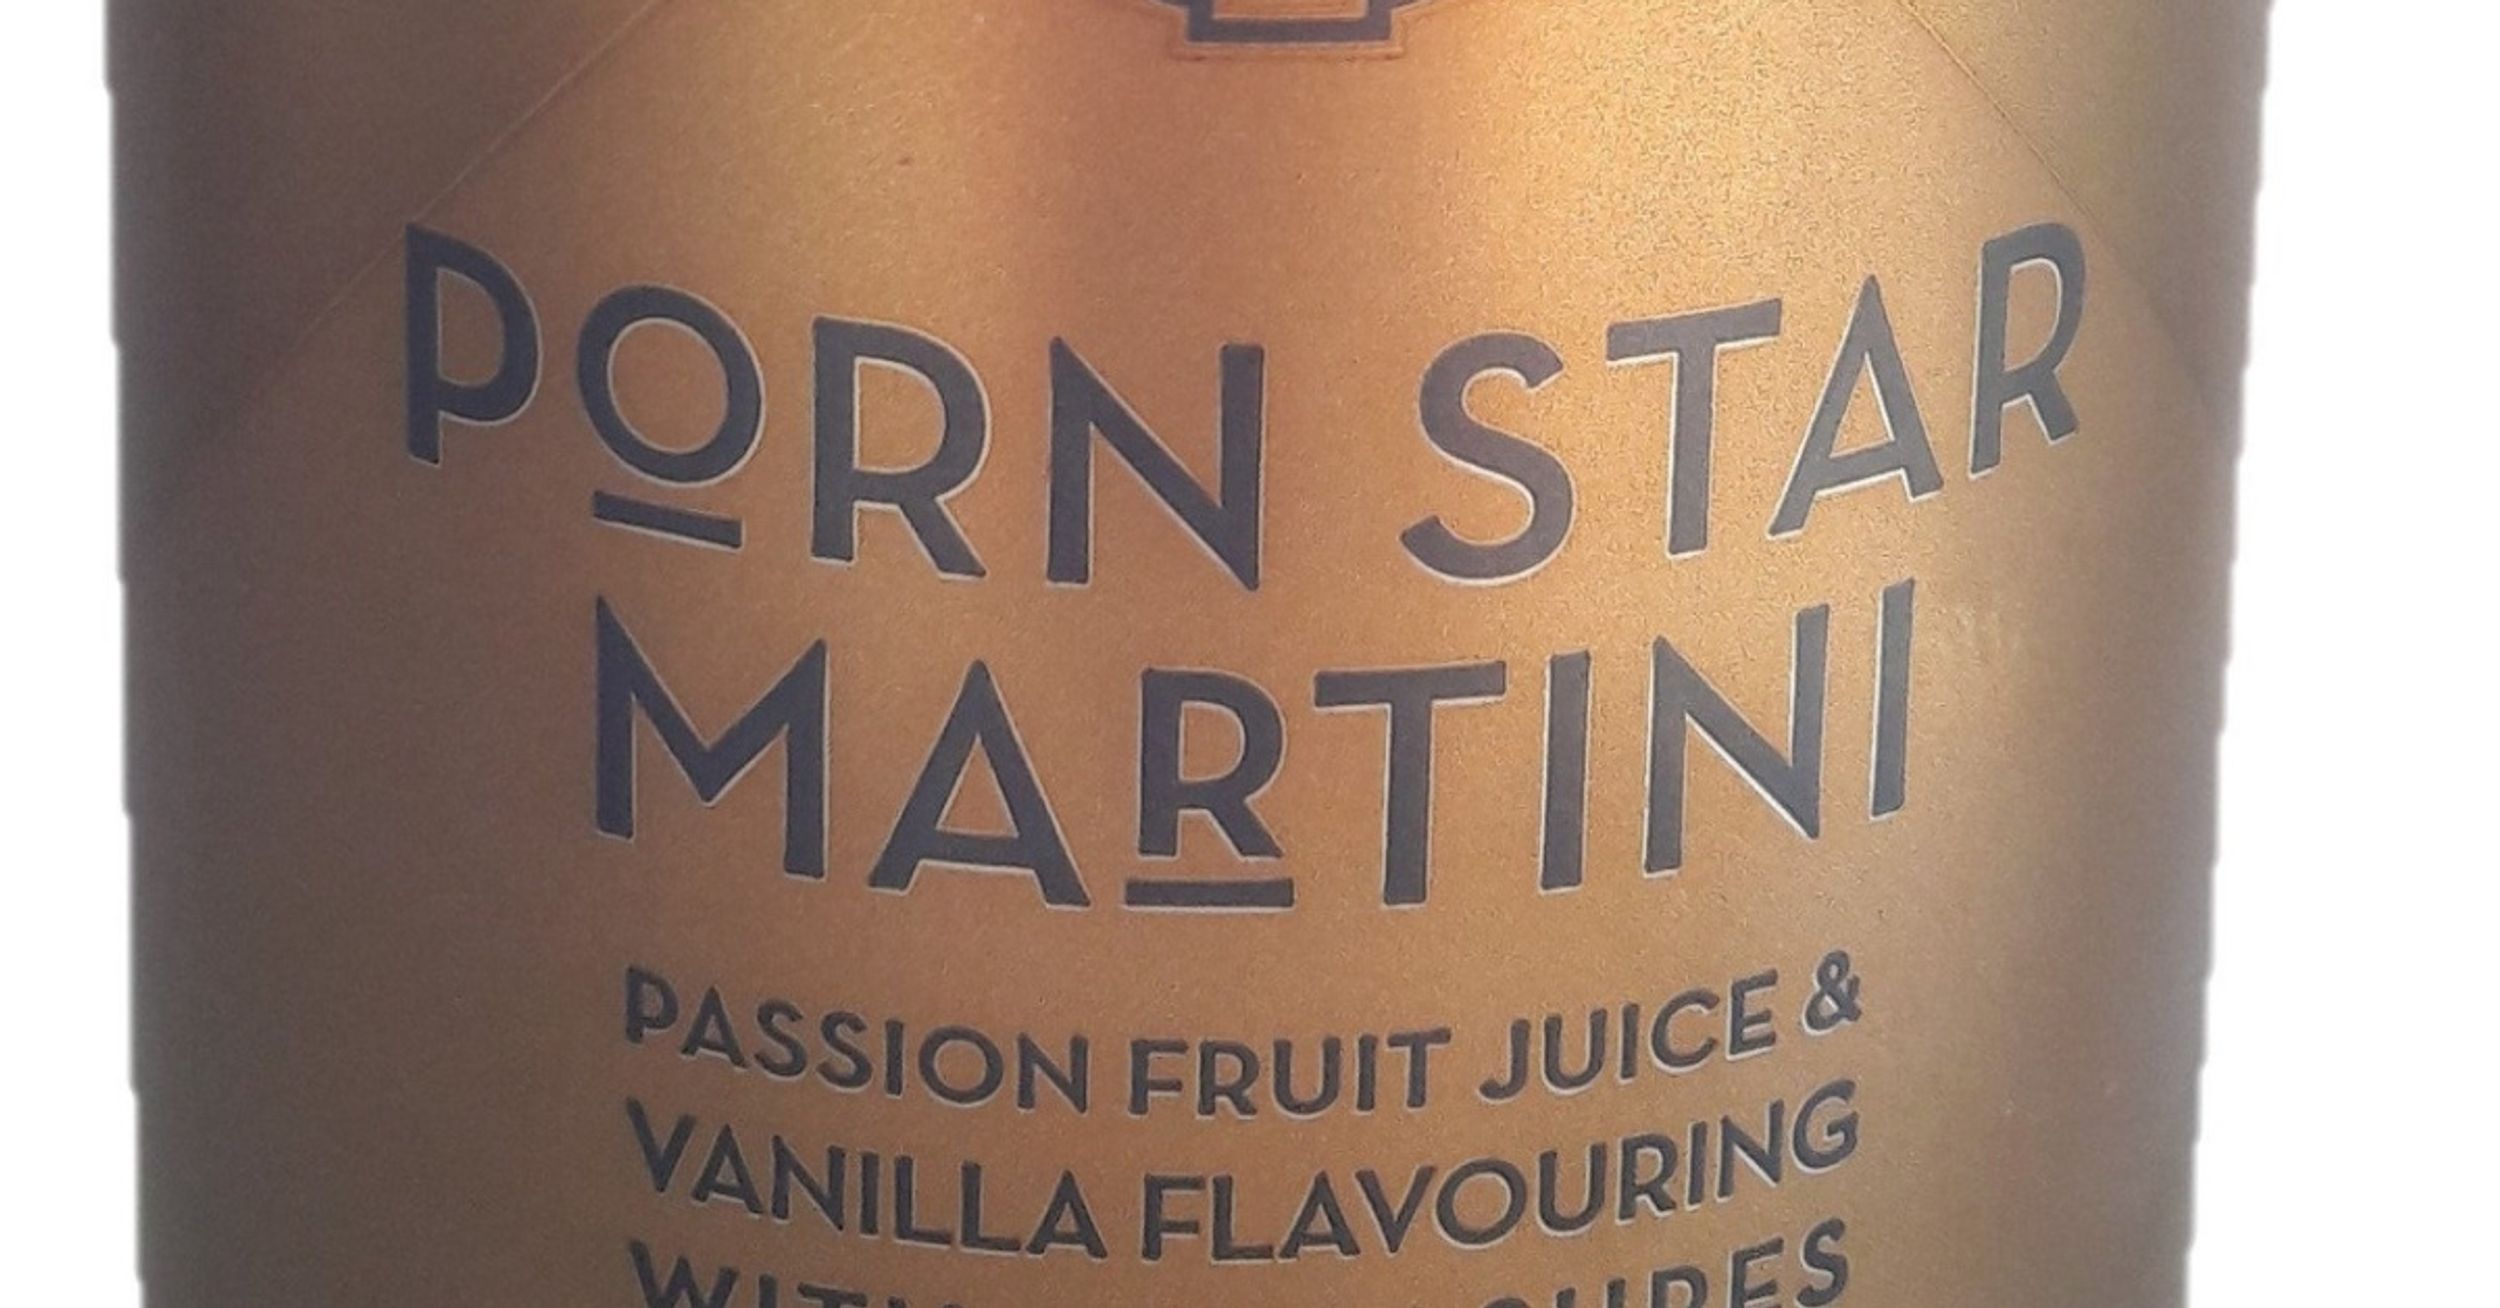 Retailer Changes Name Of Porn Star Martini After Complaints